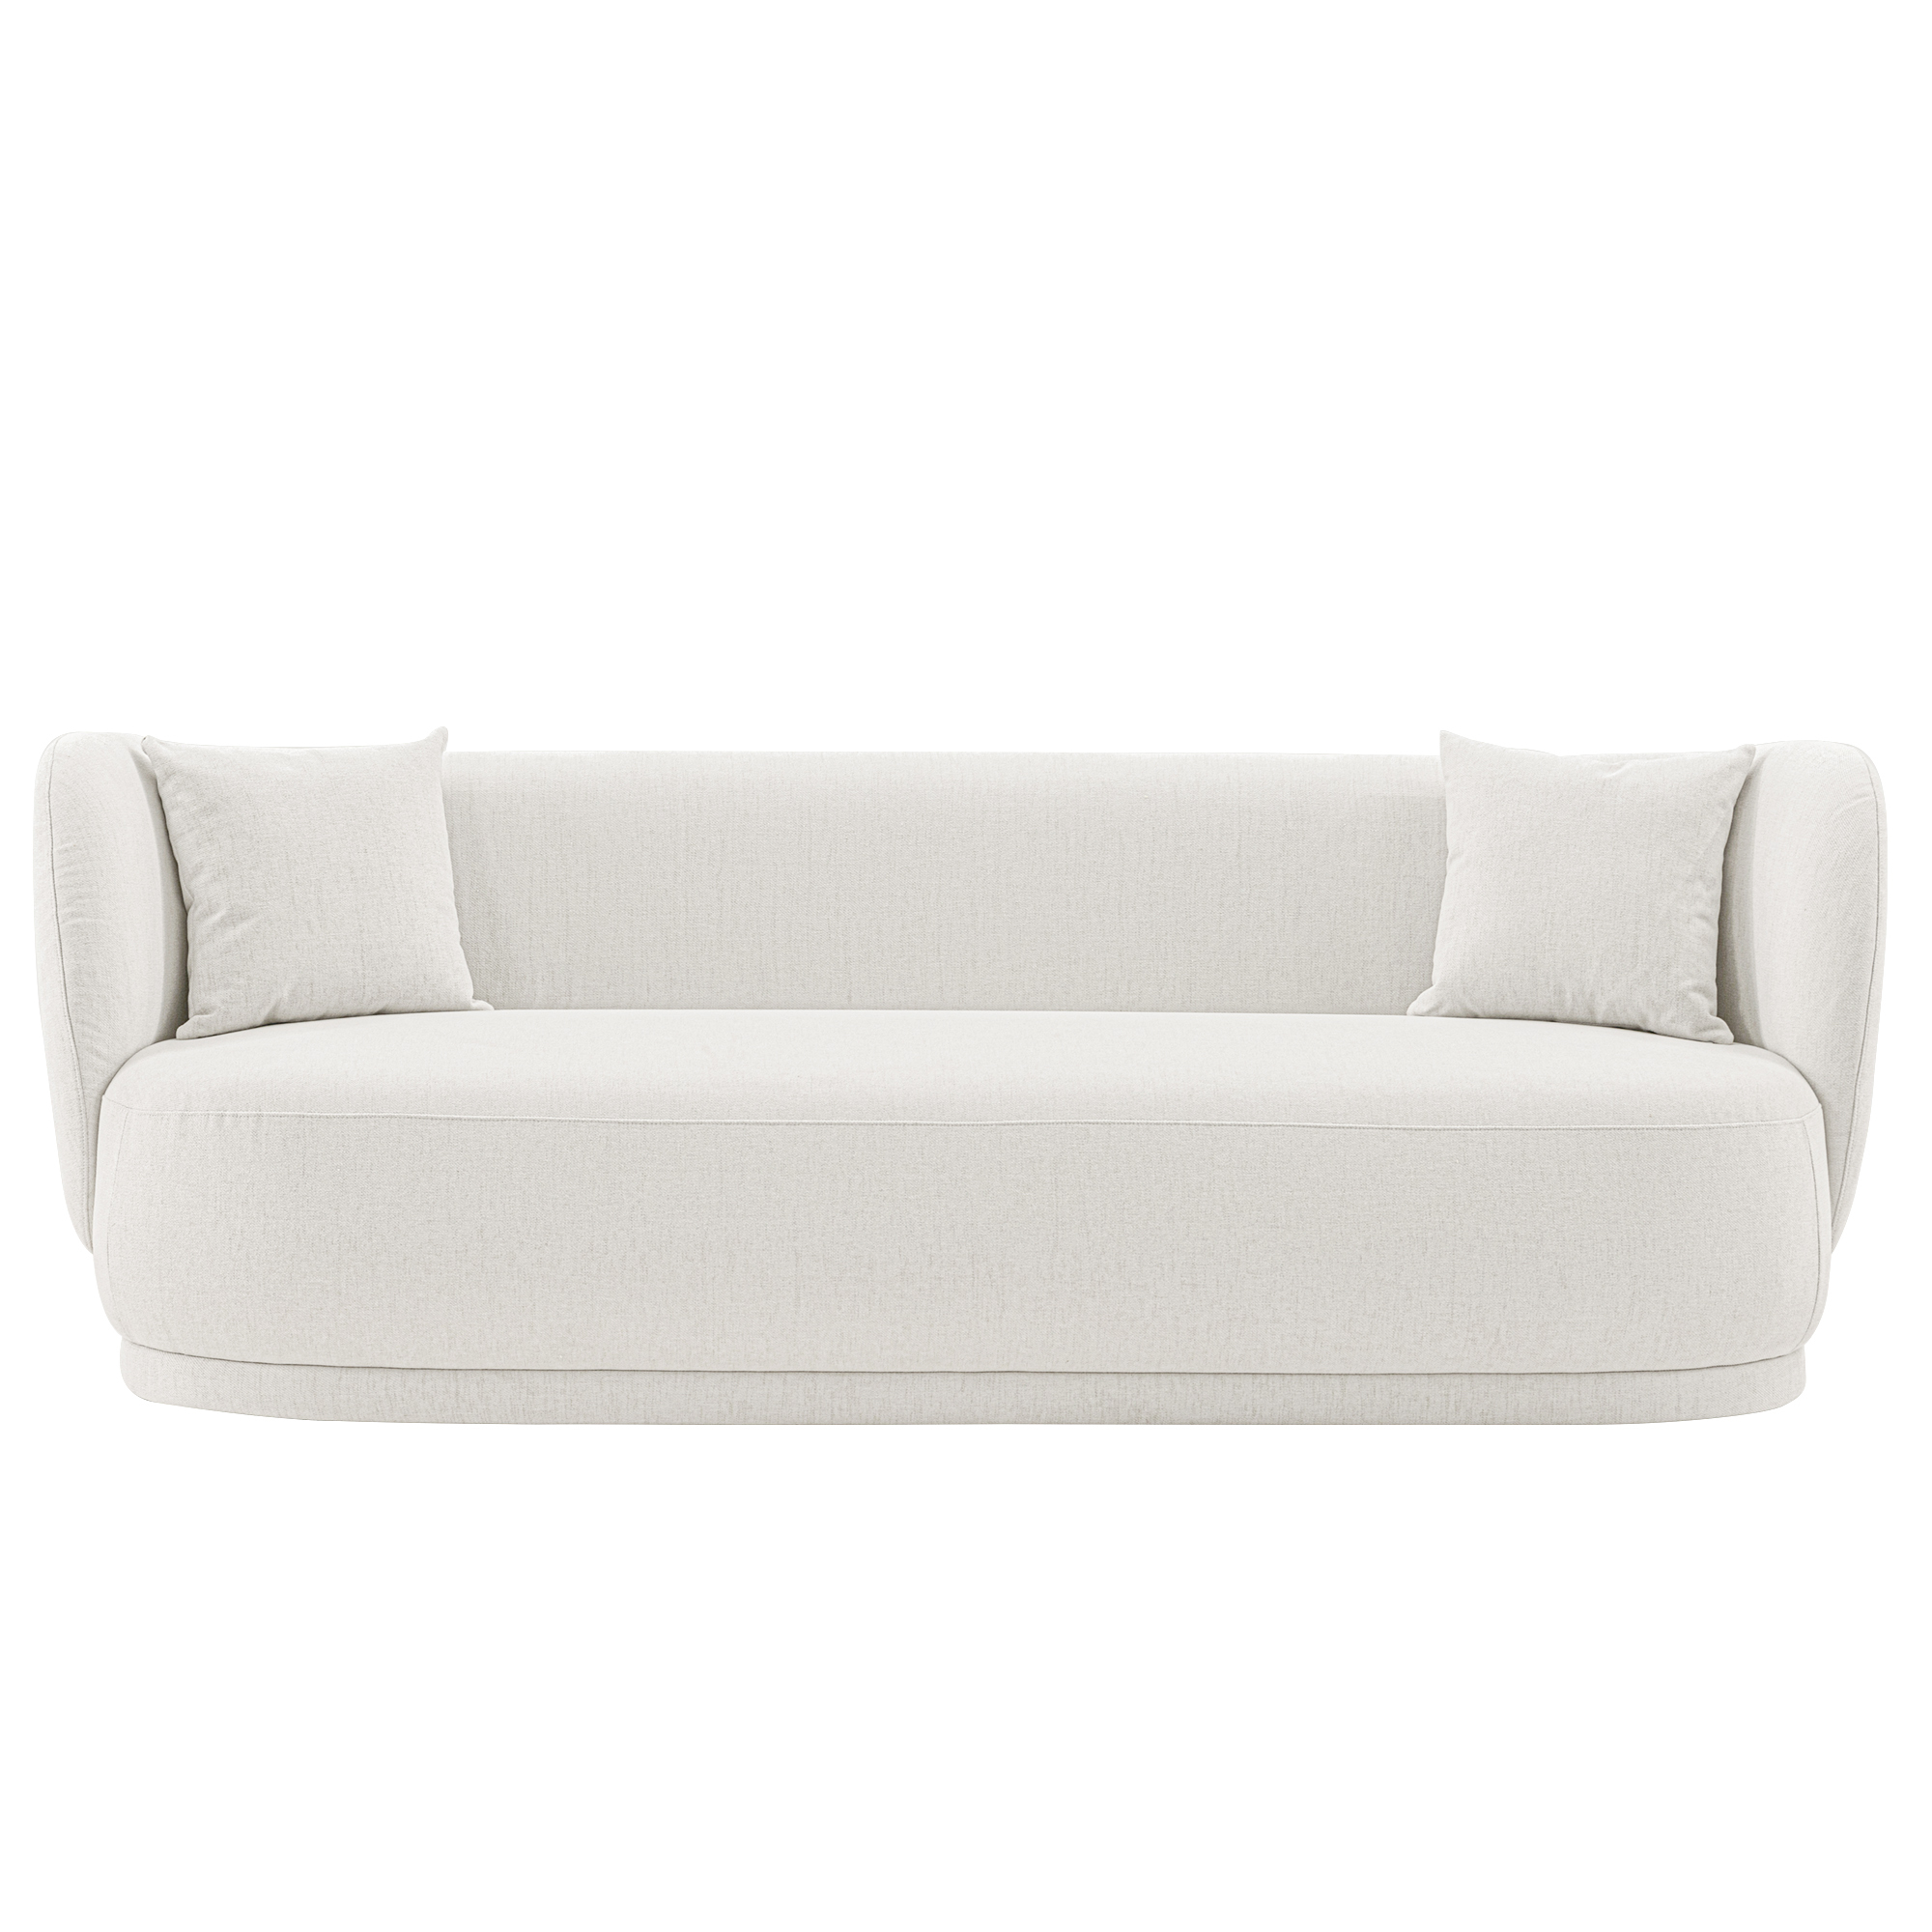 Manhattan Comfort, Contemporary Siri Linen Sofa with Pillows in Cream, Primary Color Cream, Included (qty.) 1 Model SF010